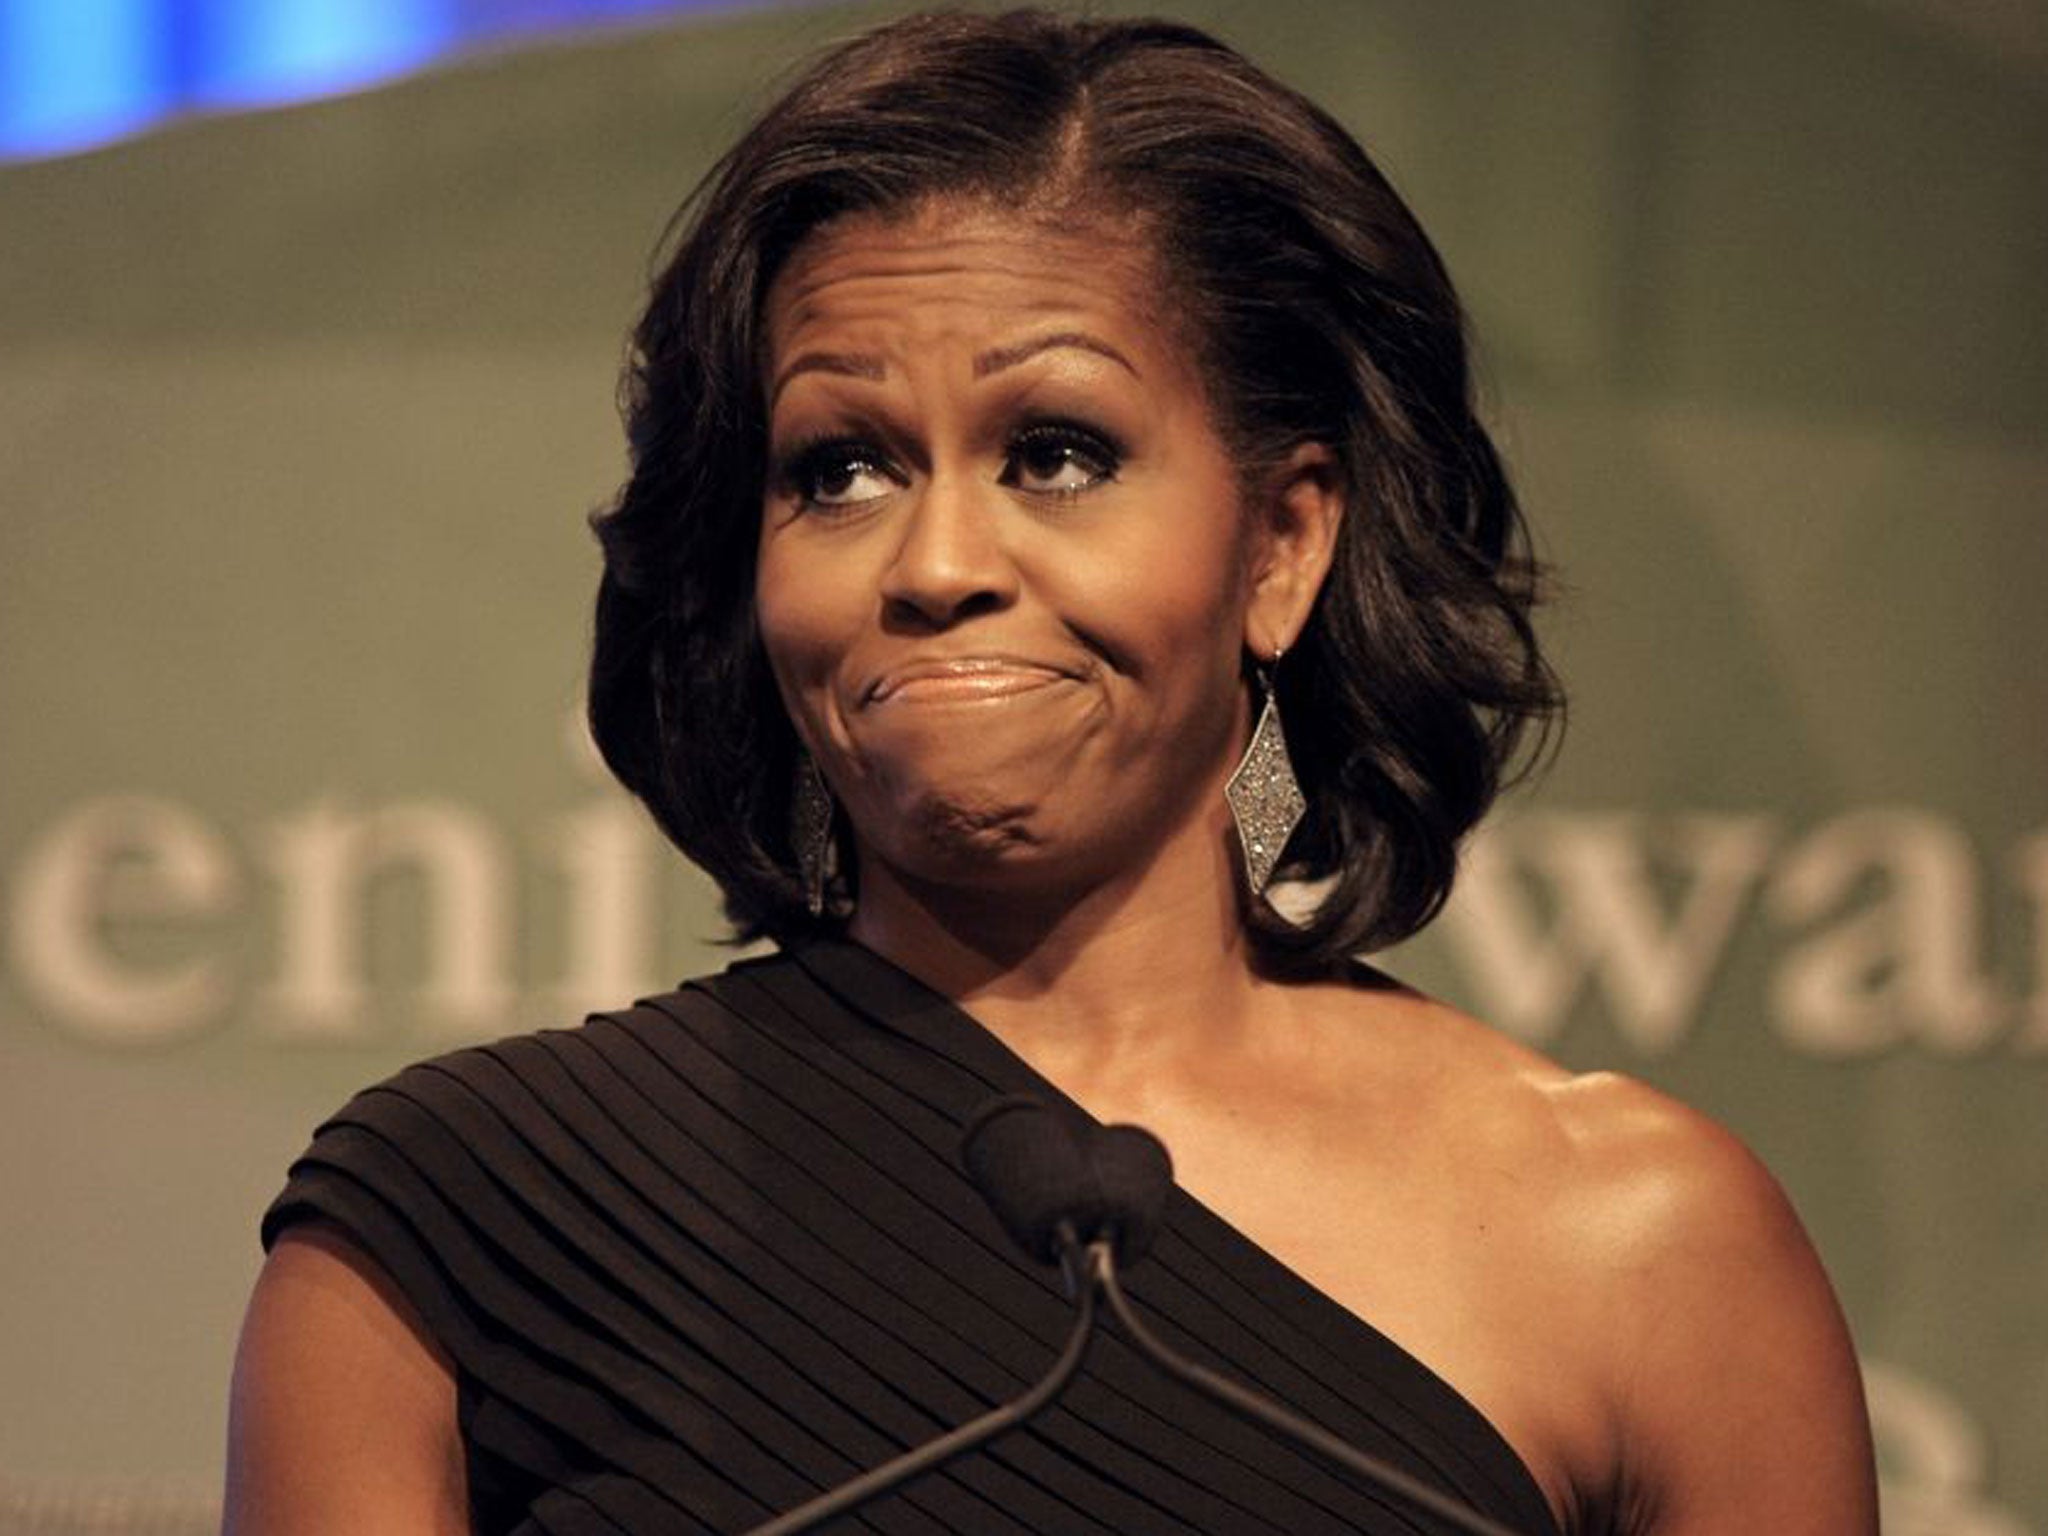 Michelle Obama told a pro-gay rights heckler: "You can take the mic but I'm leaving"